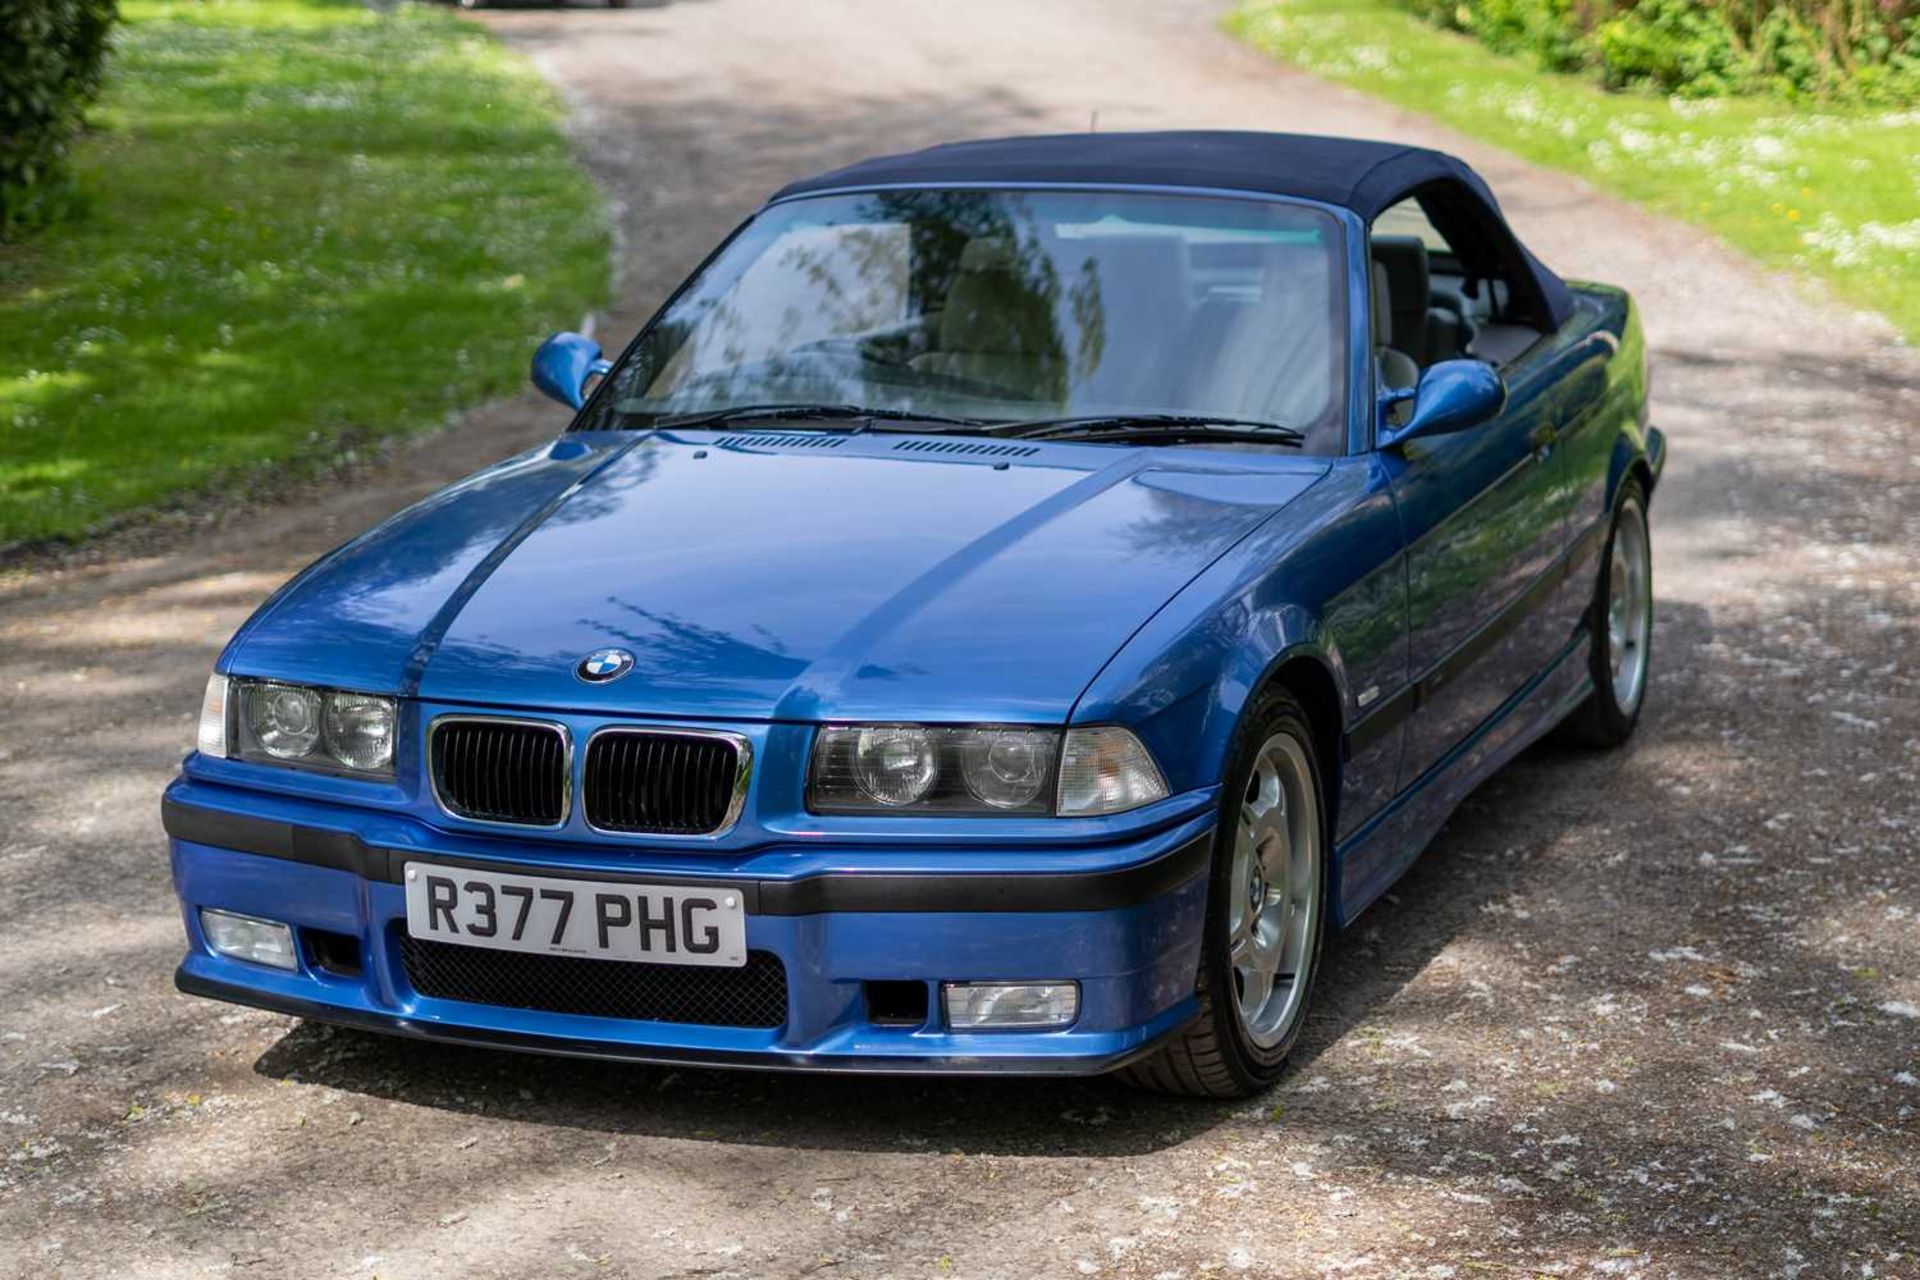 1998 BMW M3 Evolution Convertible Only 54,000 miles and full service history - Image 73 of 89